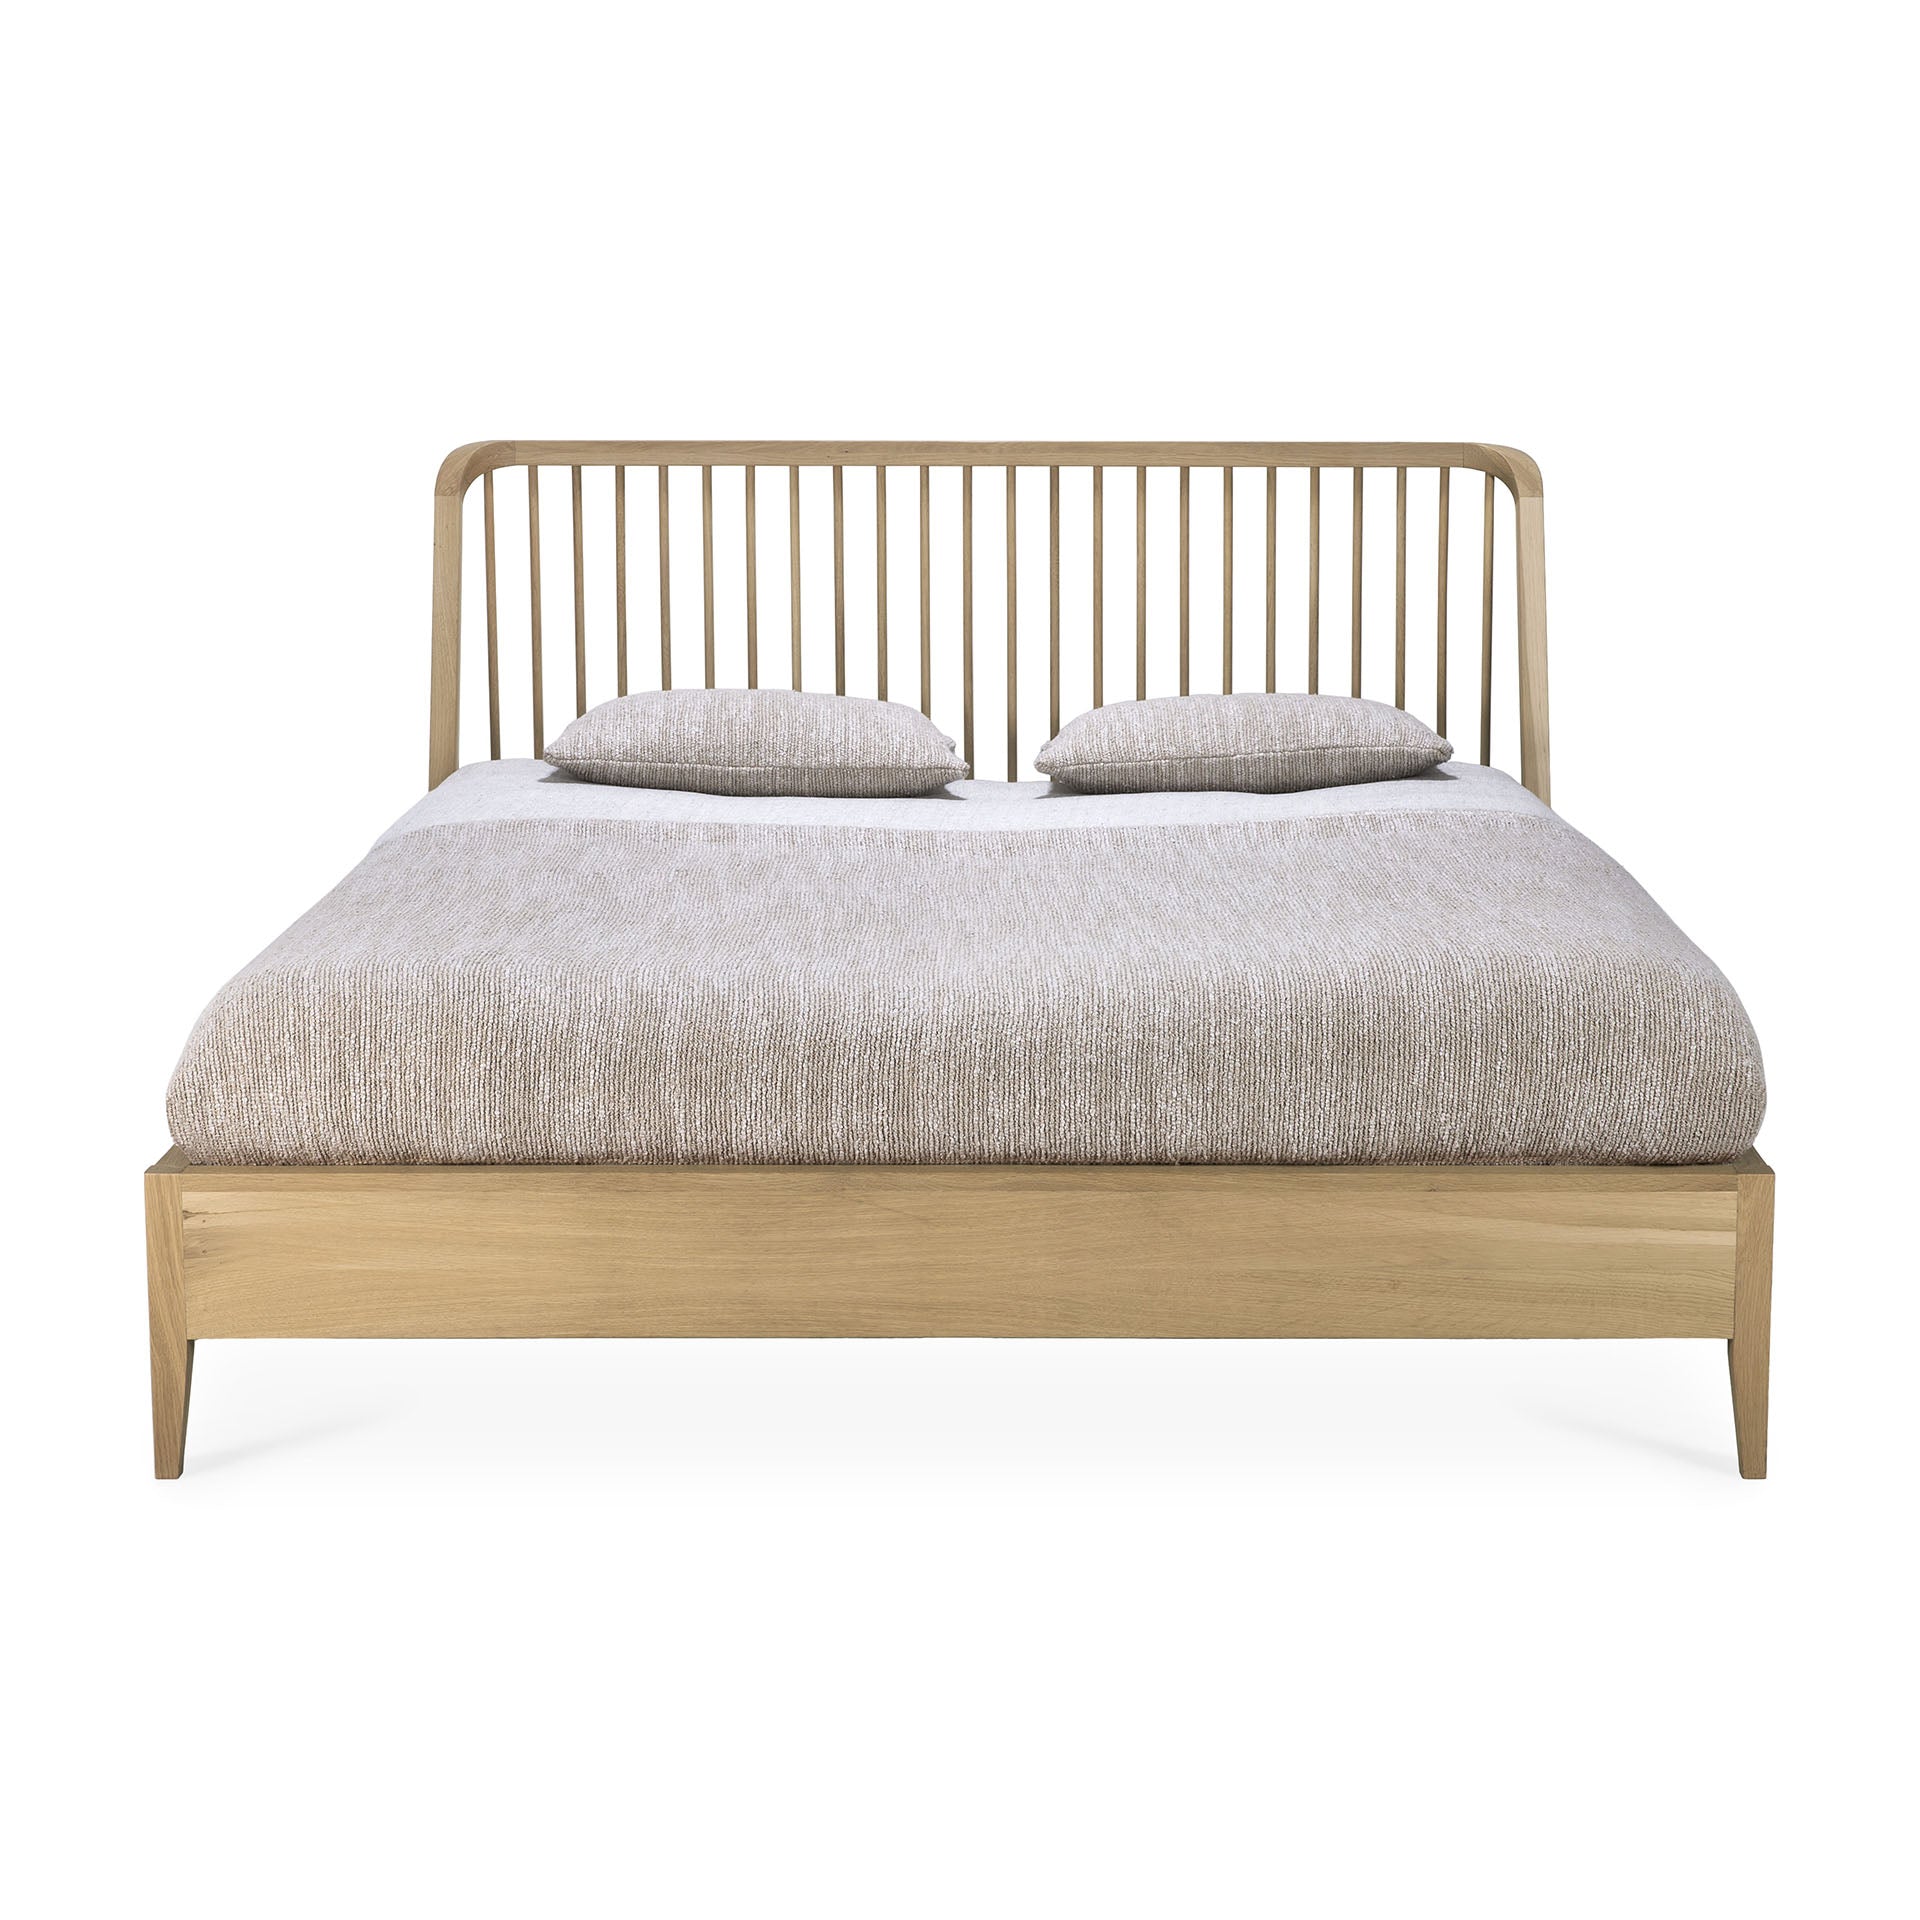 Ethnicraft Oak Spindle Bed is available from Make Your House A Home, Bendigo, Victoria, Australia